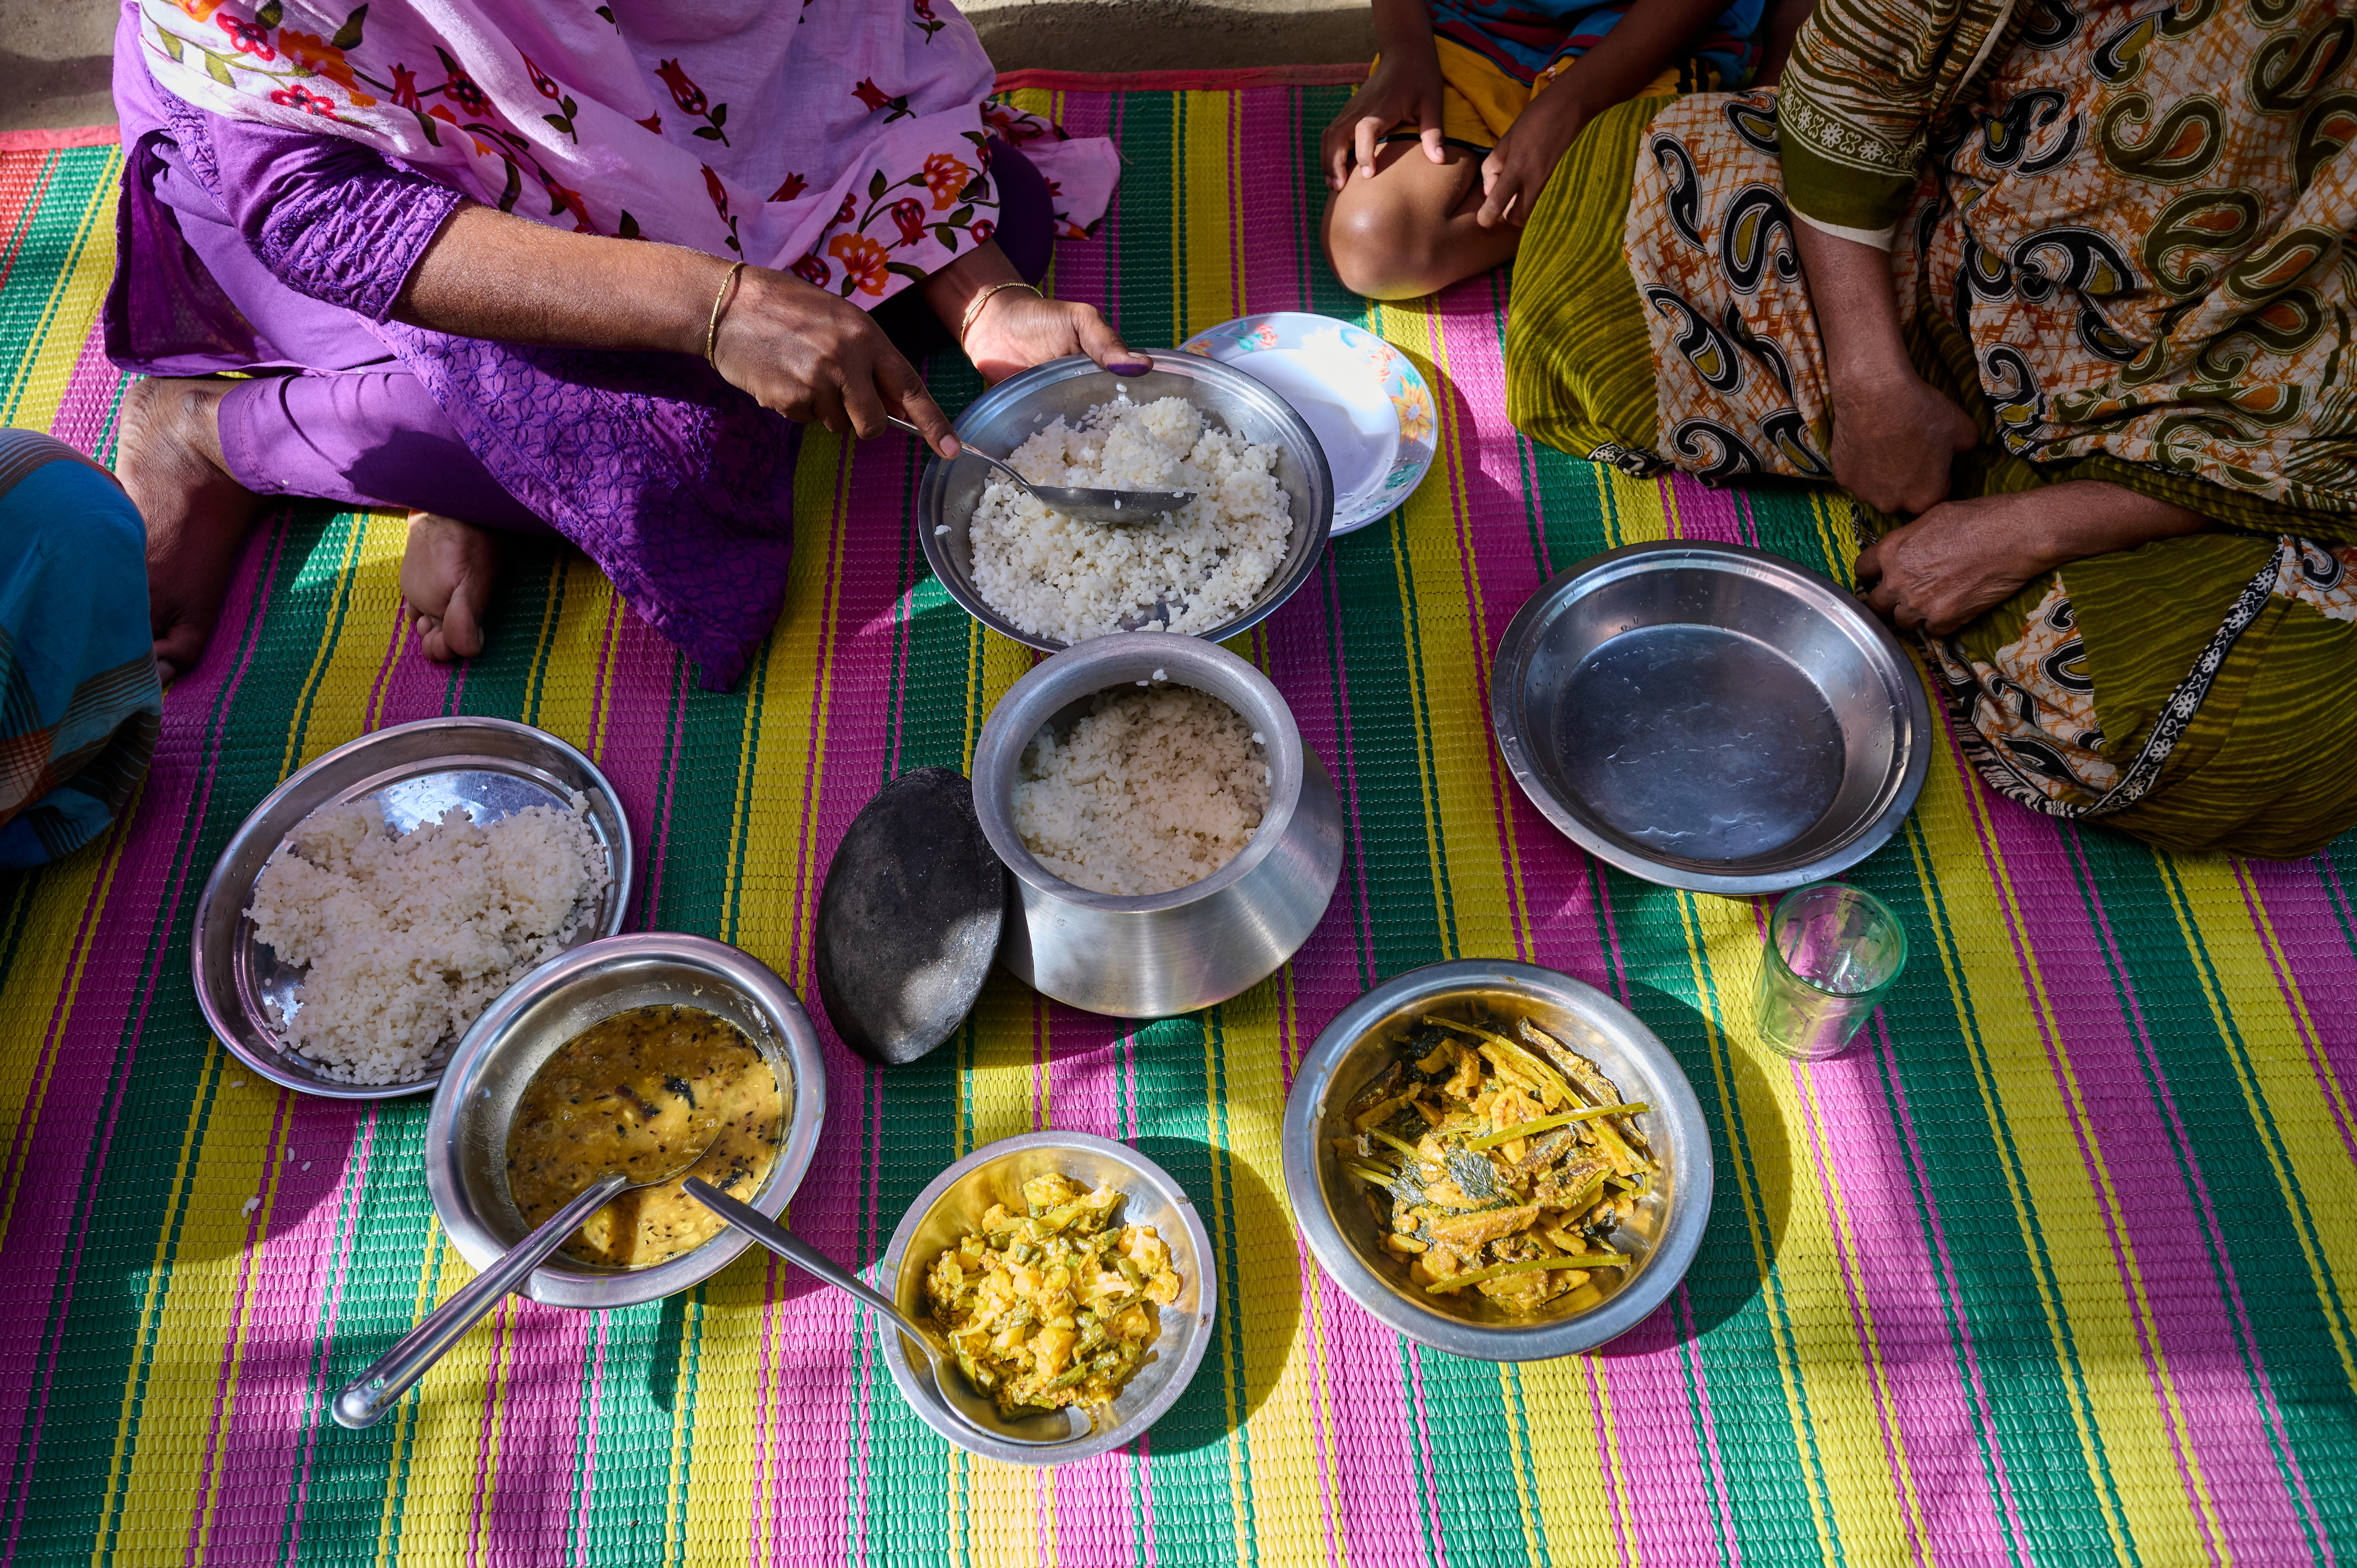 A midday meal is laid out on a colourful mat. Bowls of rice, and differnt kinds of vegetable curry are present. Two women sit cross legged on the floor, as one woman starts to serve the rice.